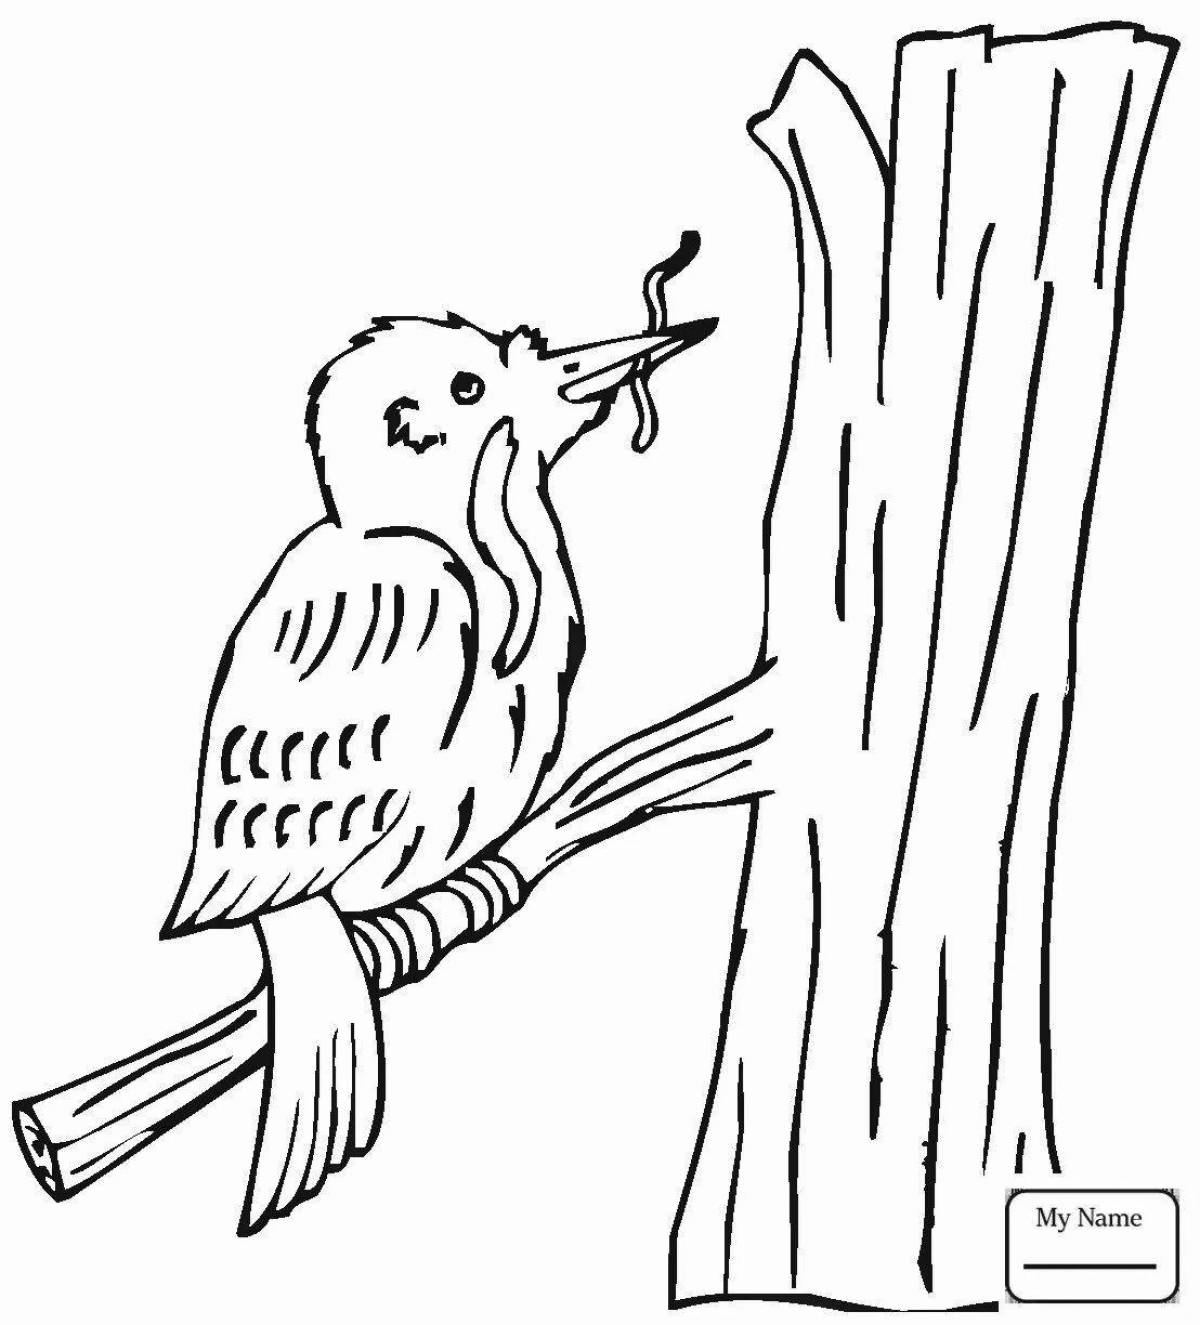 Magic disheveled sparrow coloring page